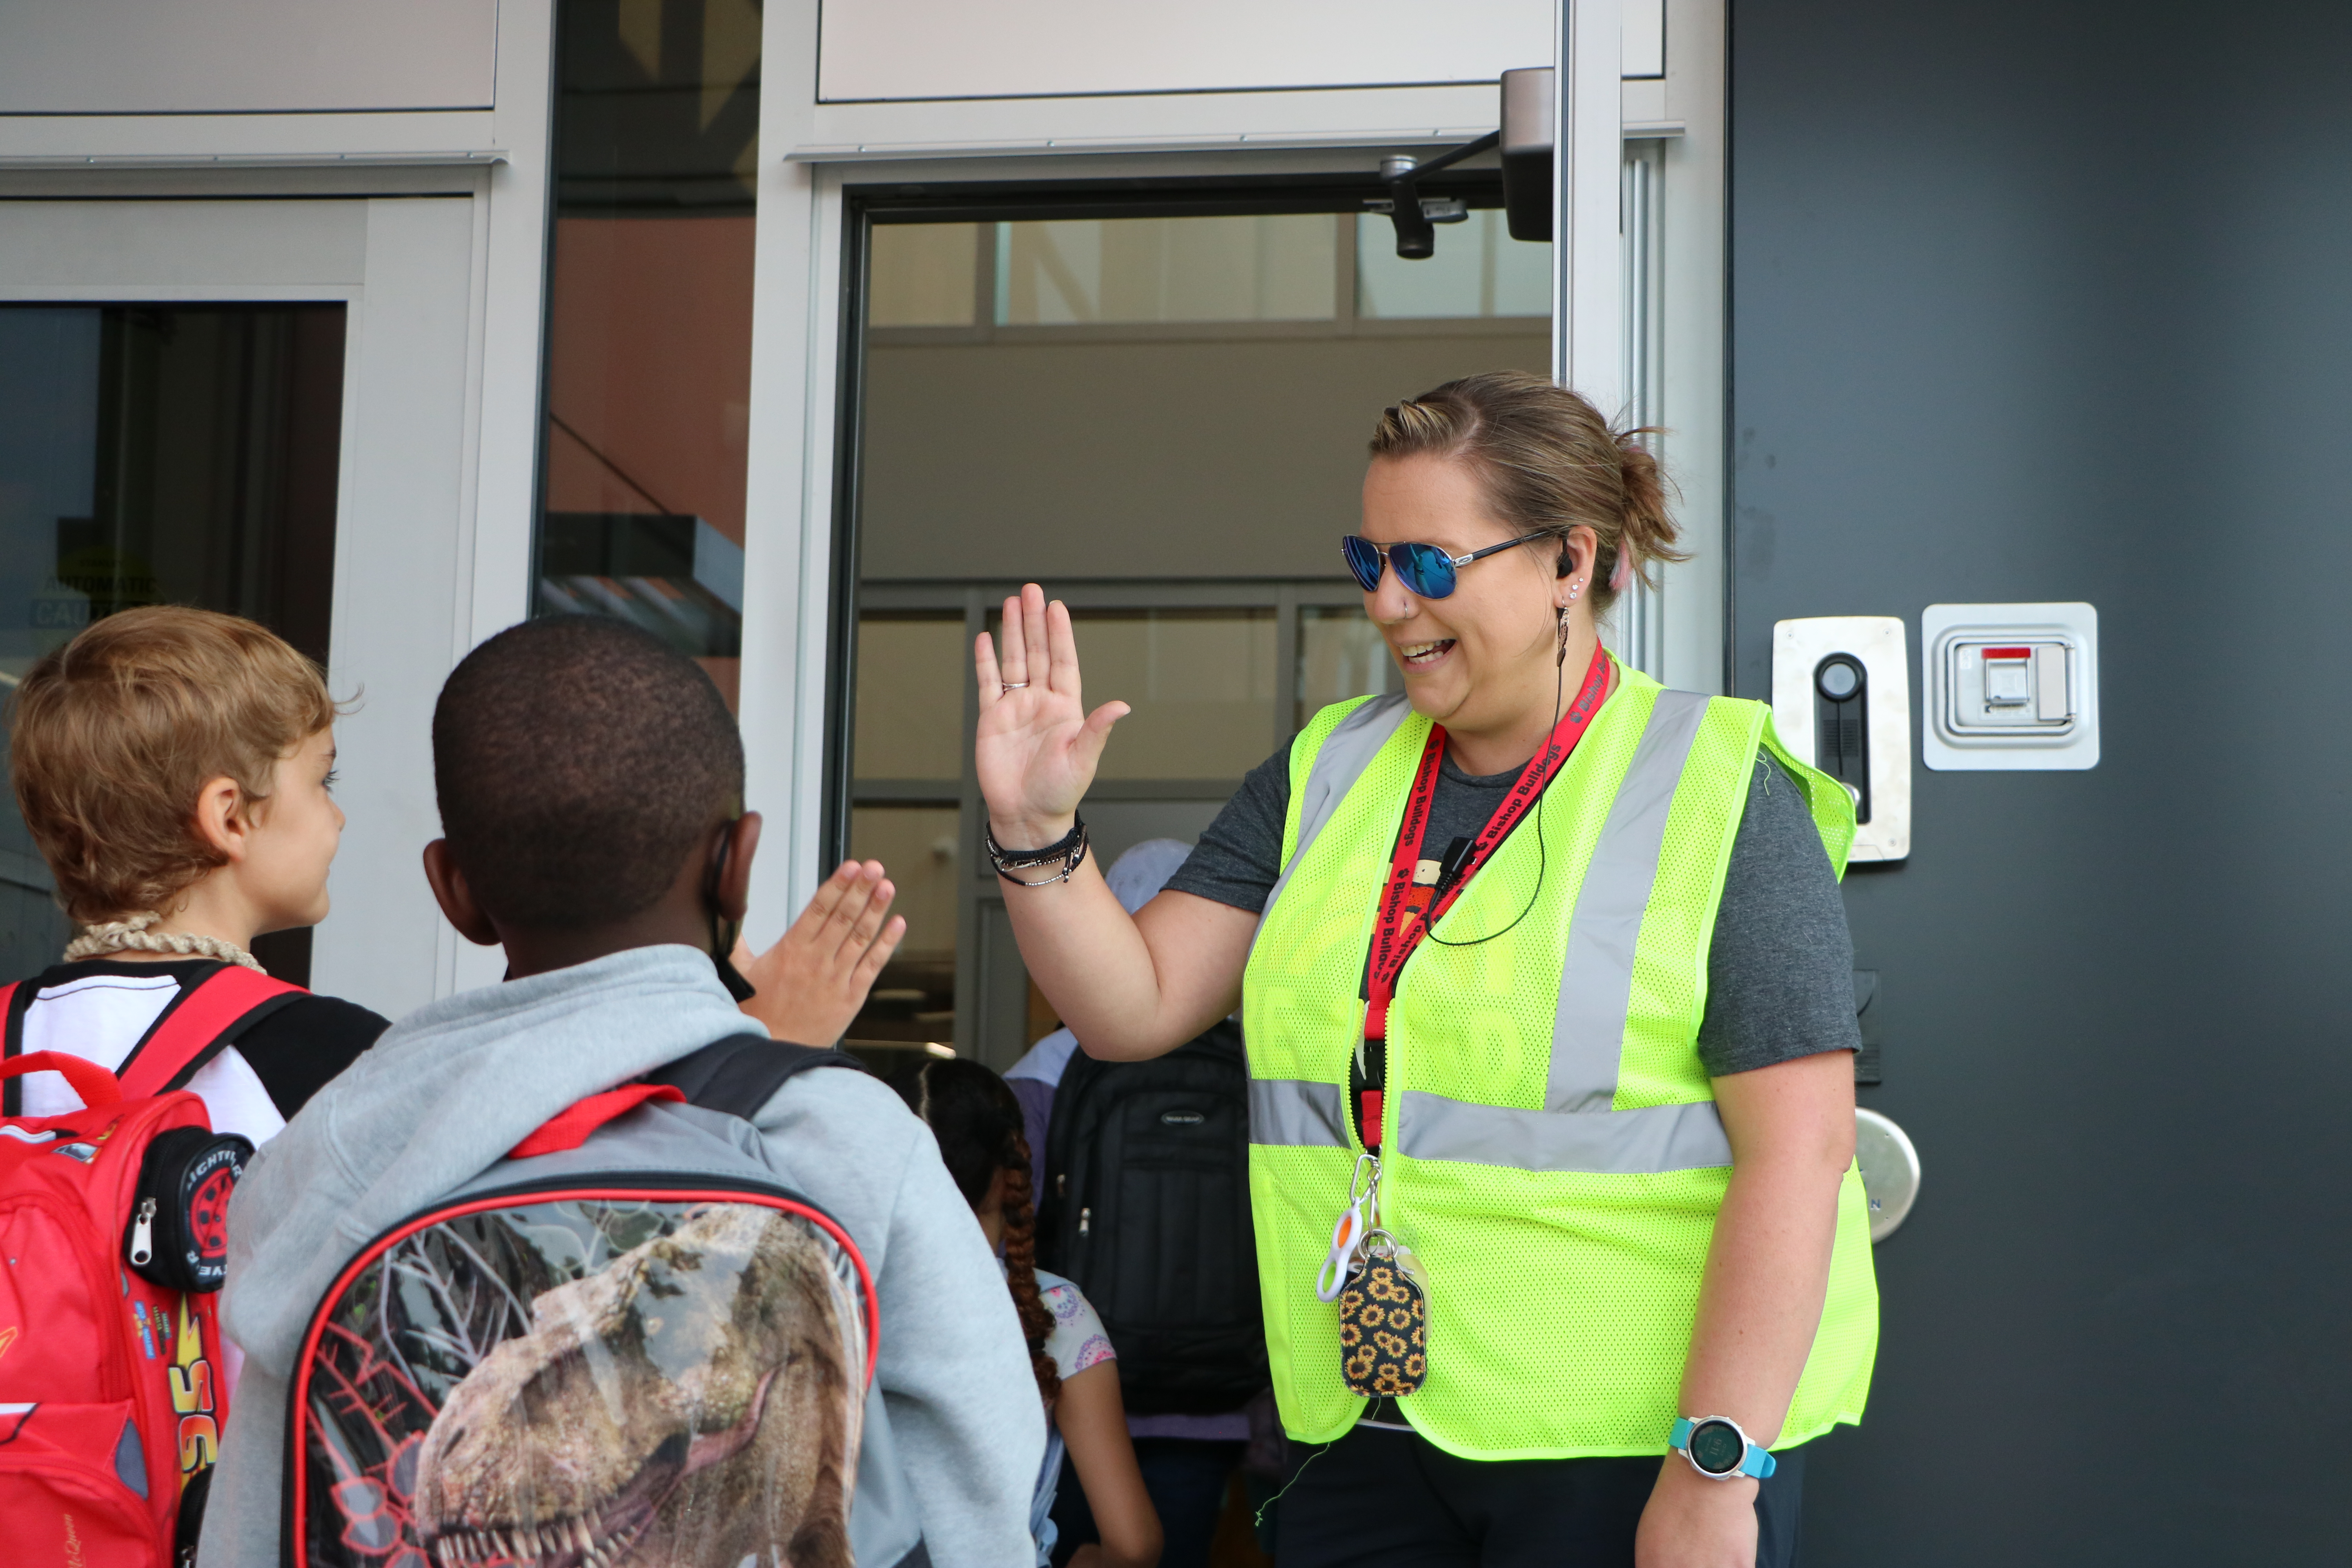 Staff high fiving students entering the school